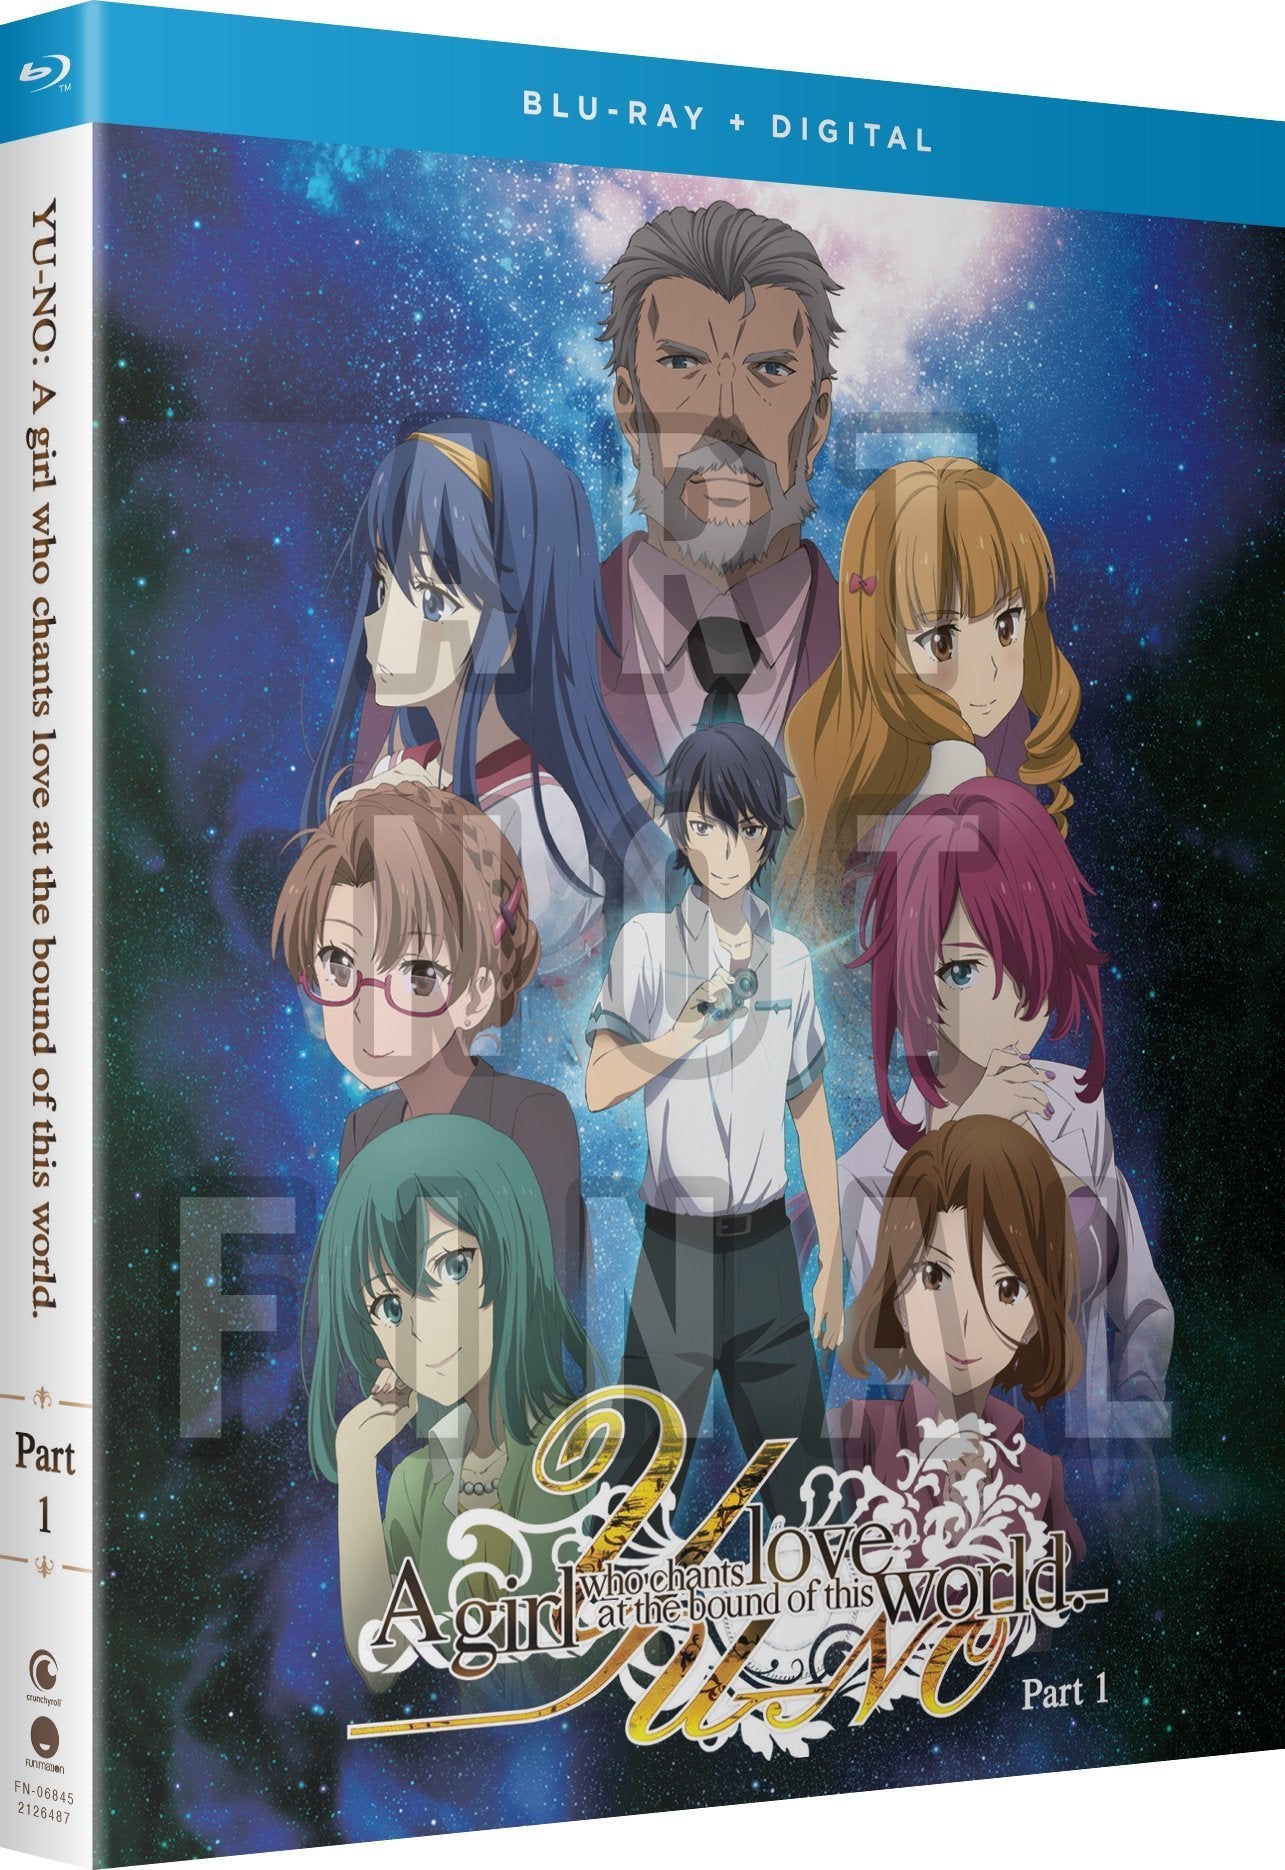 YU-NO: A Girl Who Chants Love at the Bound of This World - Part 1 - Blu-ray image count 1